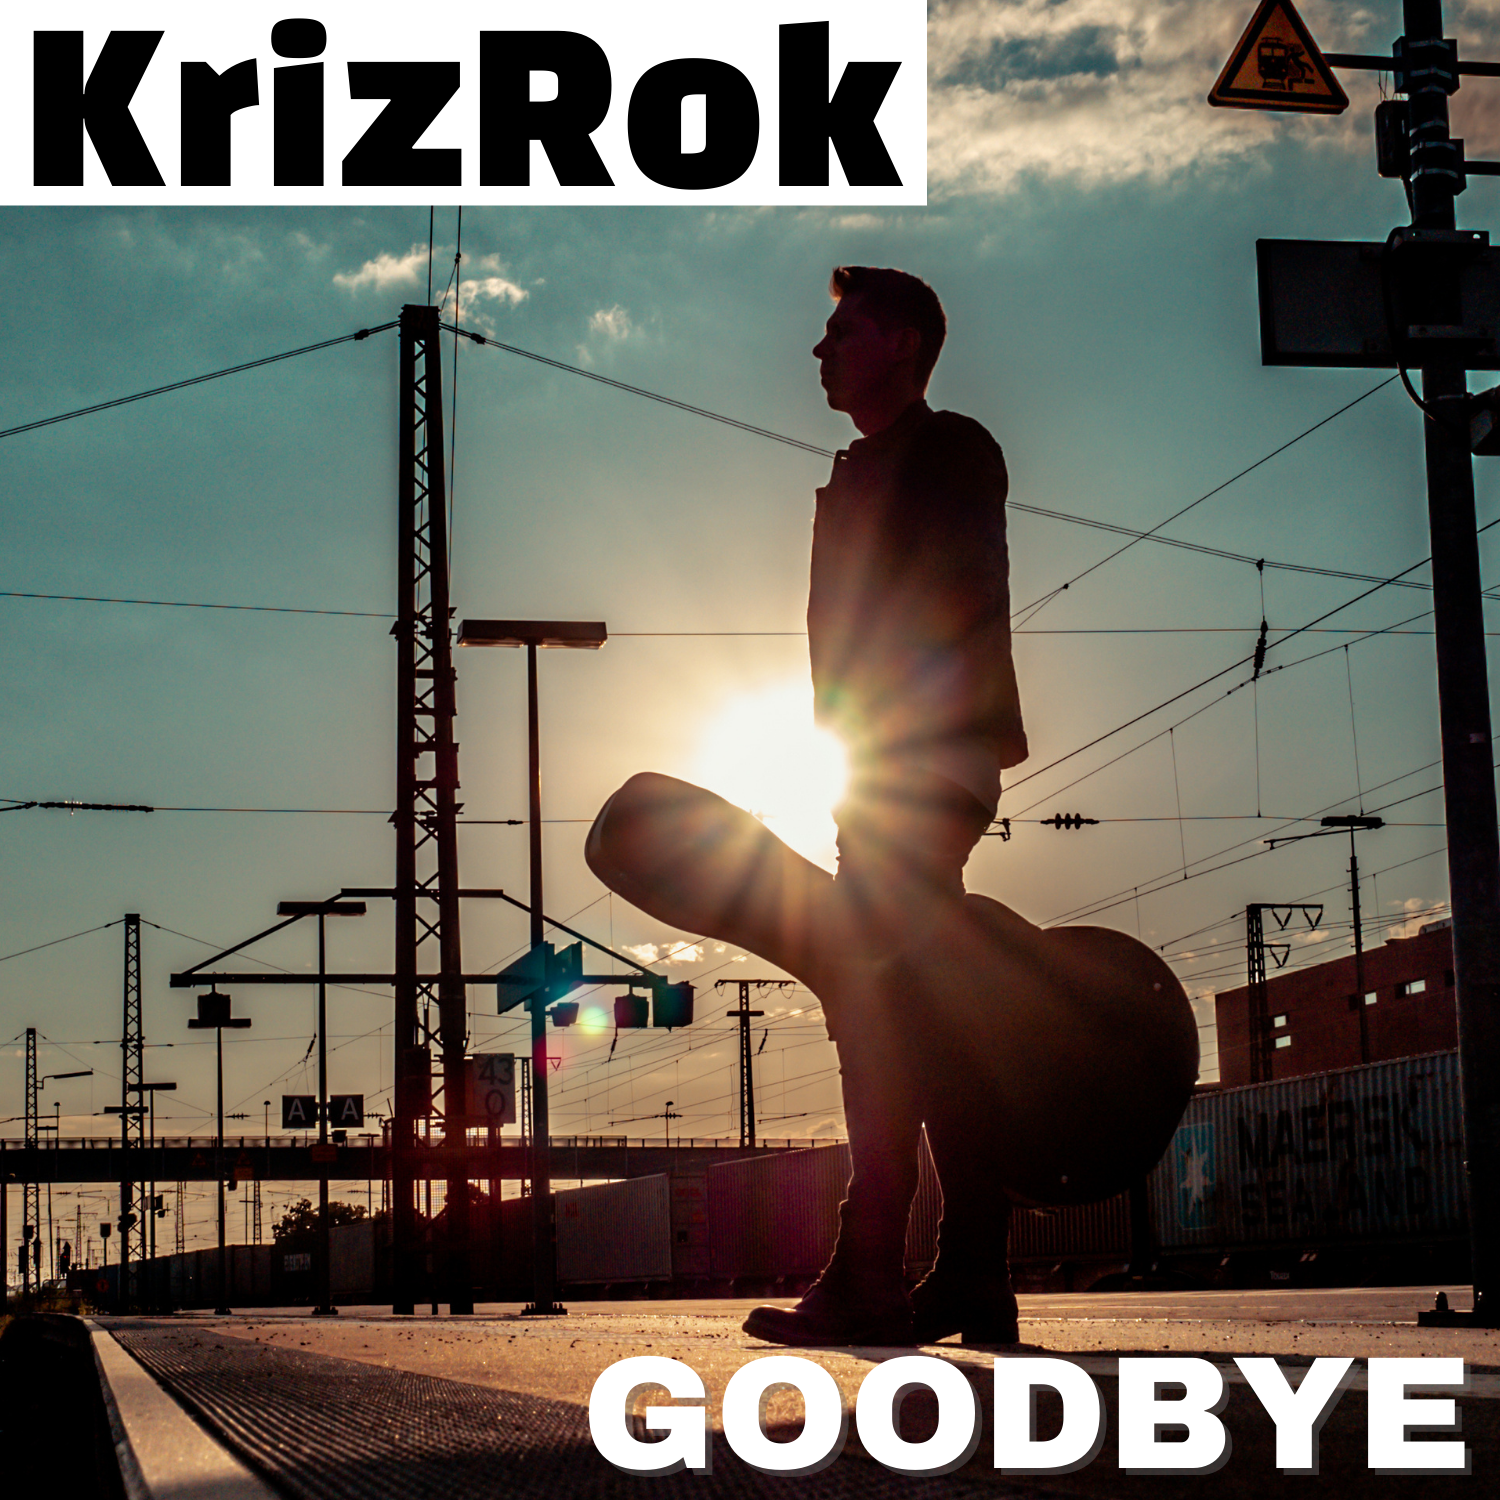 With a strong harmony between sophisticated crescendos and whimsical innocence, ‘KrizRok’ releases new single ‘Goodbye’